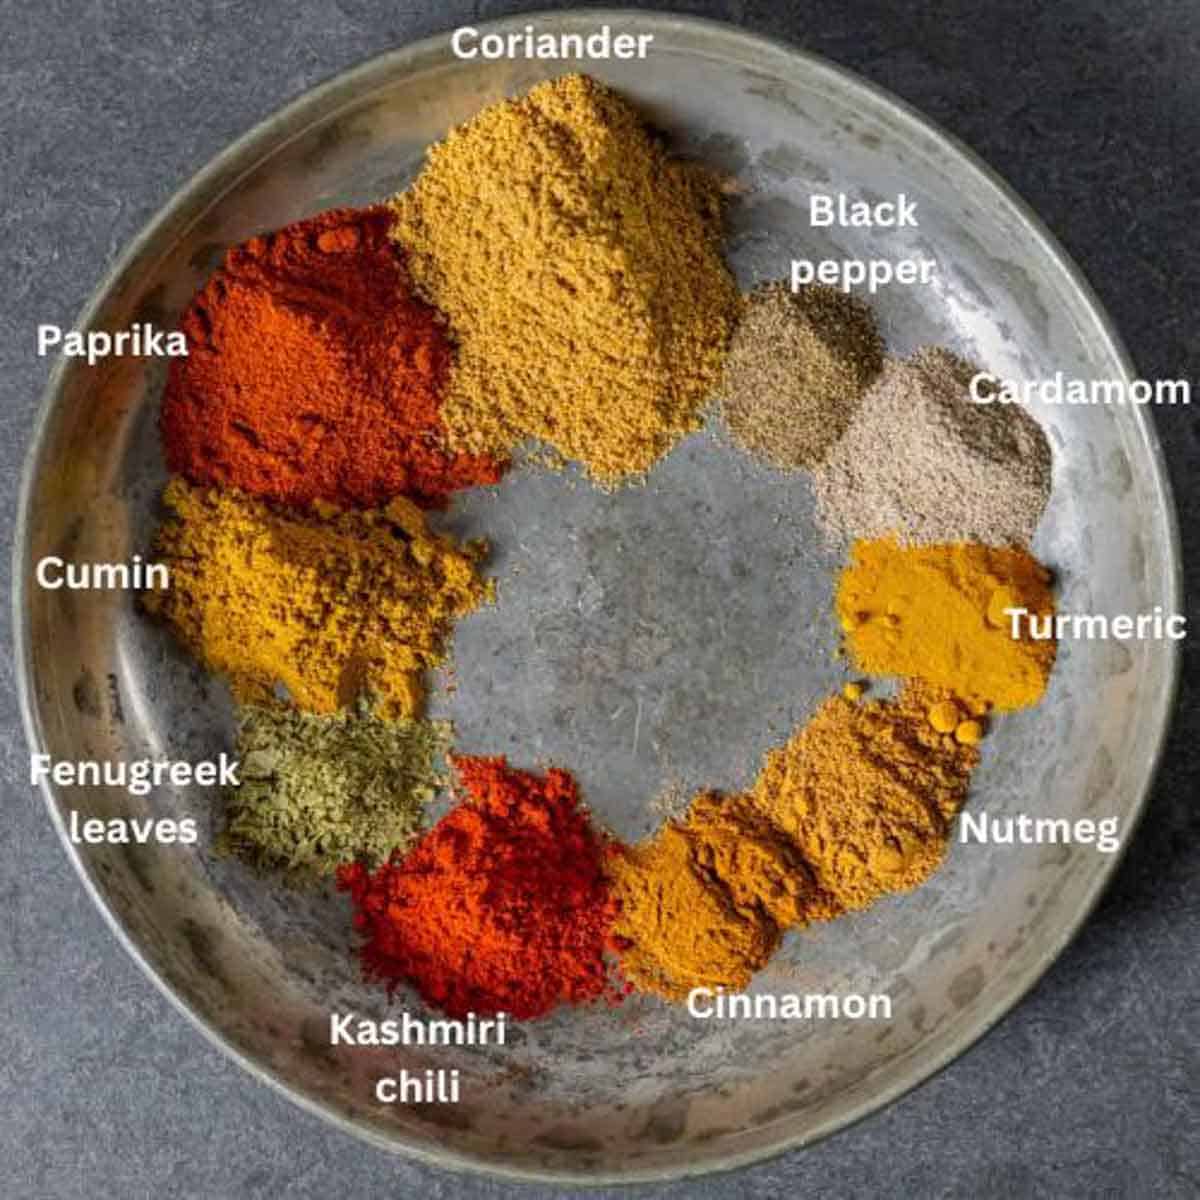 Colorful powdered spices on a silver plate in a circle with white text labels for each.